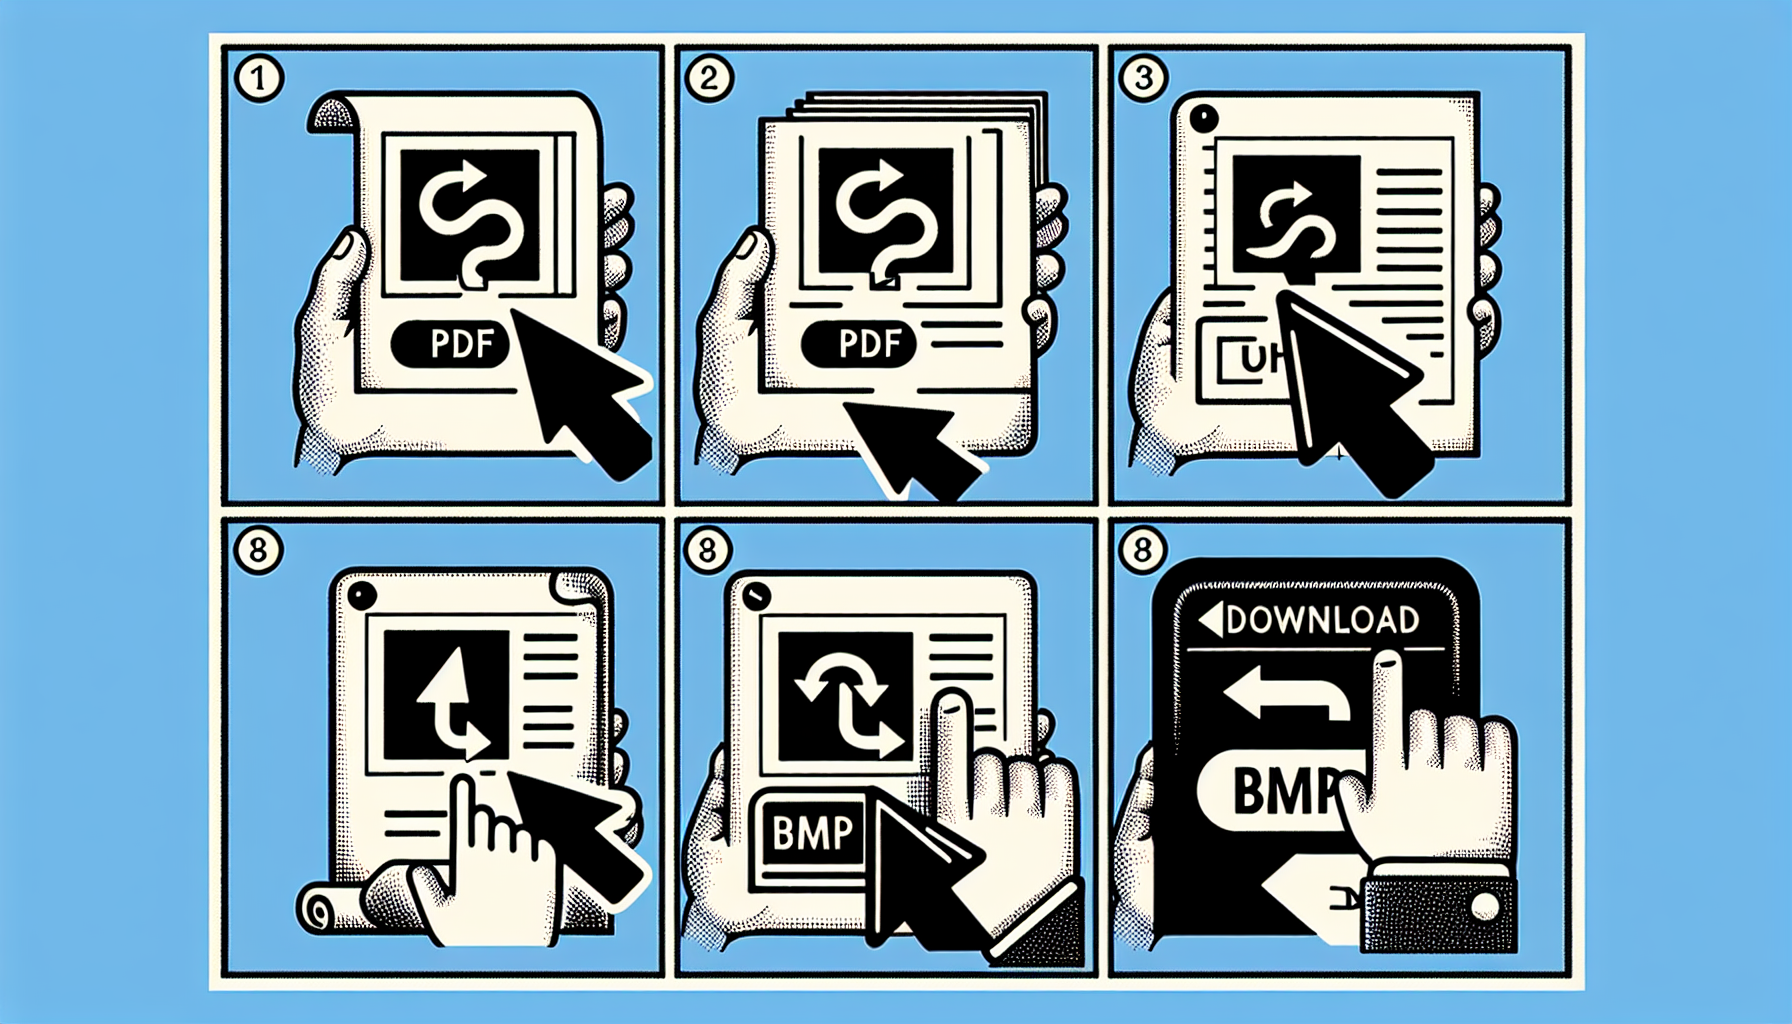 Step-by-step guide to converting PDF to BMP